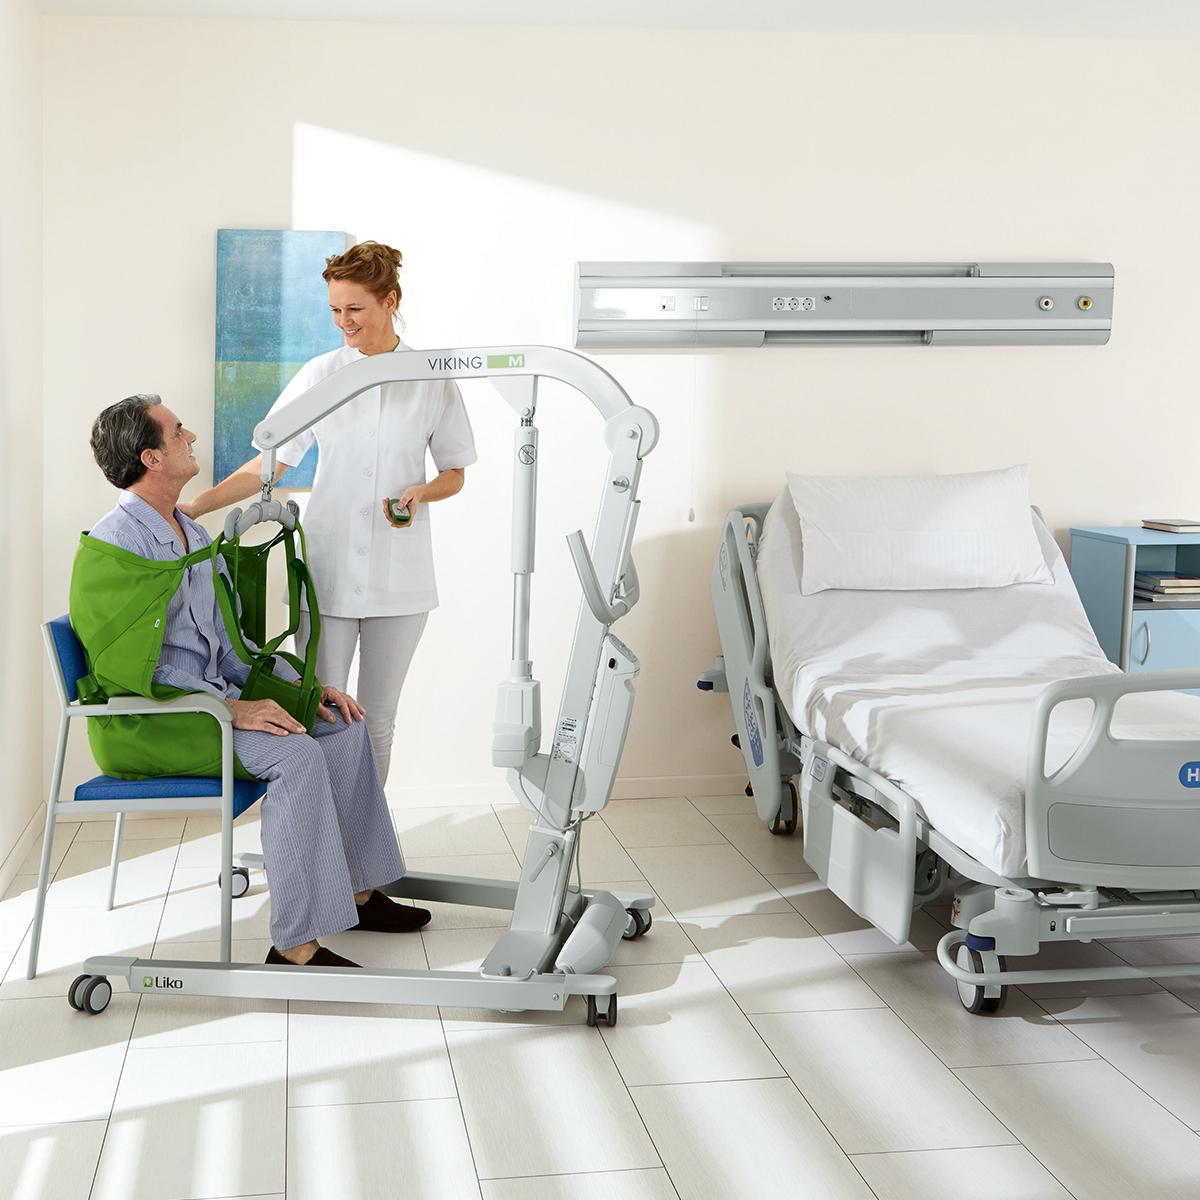 A patient sits in a seated sling attached to a patient lift while a clinician assists, with a Hillrom 900 bed in the room